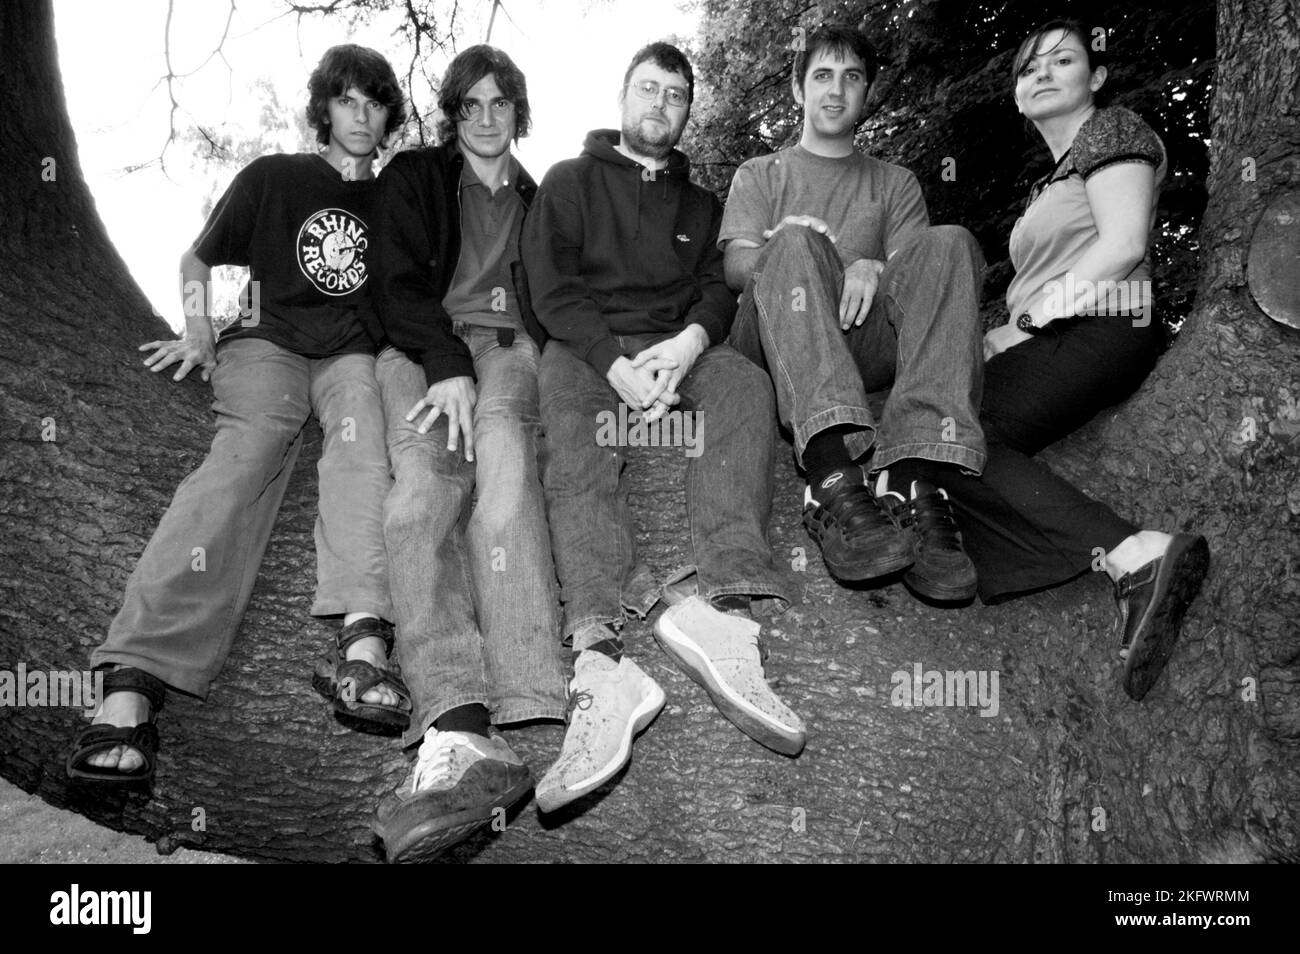 GORKY'S ZYGOTIC MYNCI publicity photographs taken in Cardiff, 30 June 2003. Photograph: ROB WATKINS. INFO: Gorky's Zygotic Mynci, a Welsh psychedelic and indie rock band active from the early 90s to the early 2000s, crafted a whimsical and eclectic sound. Albums like 'Barafundle' showcased their folk-influenced, multilingual approach, making them influential in the alternative and indie scenes. Stock Photo